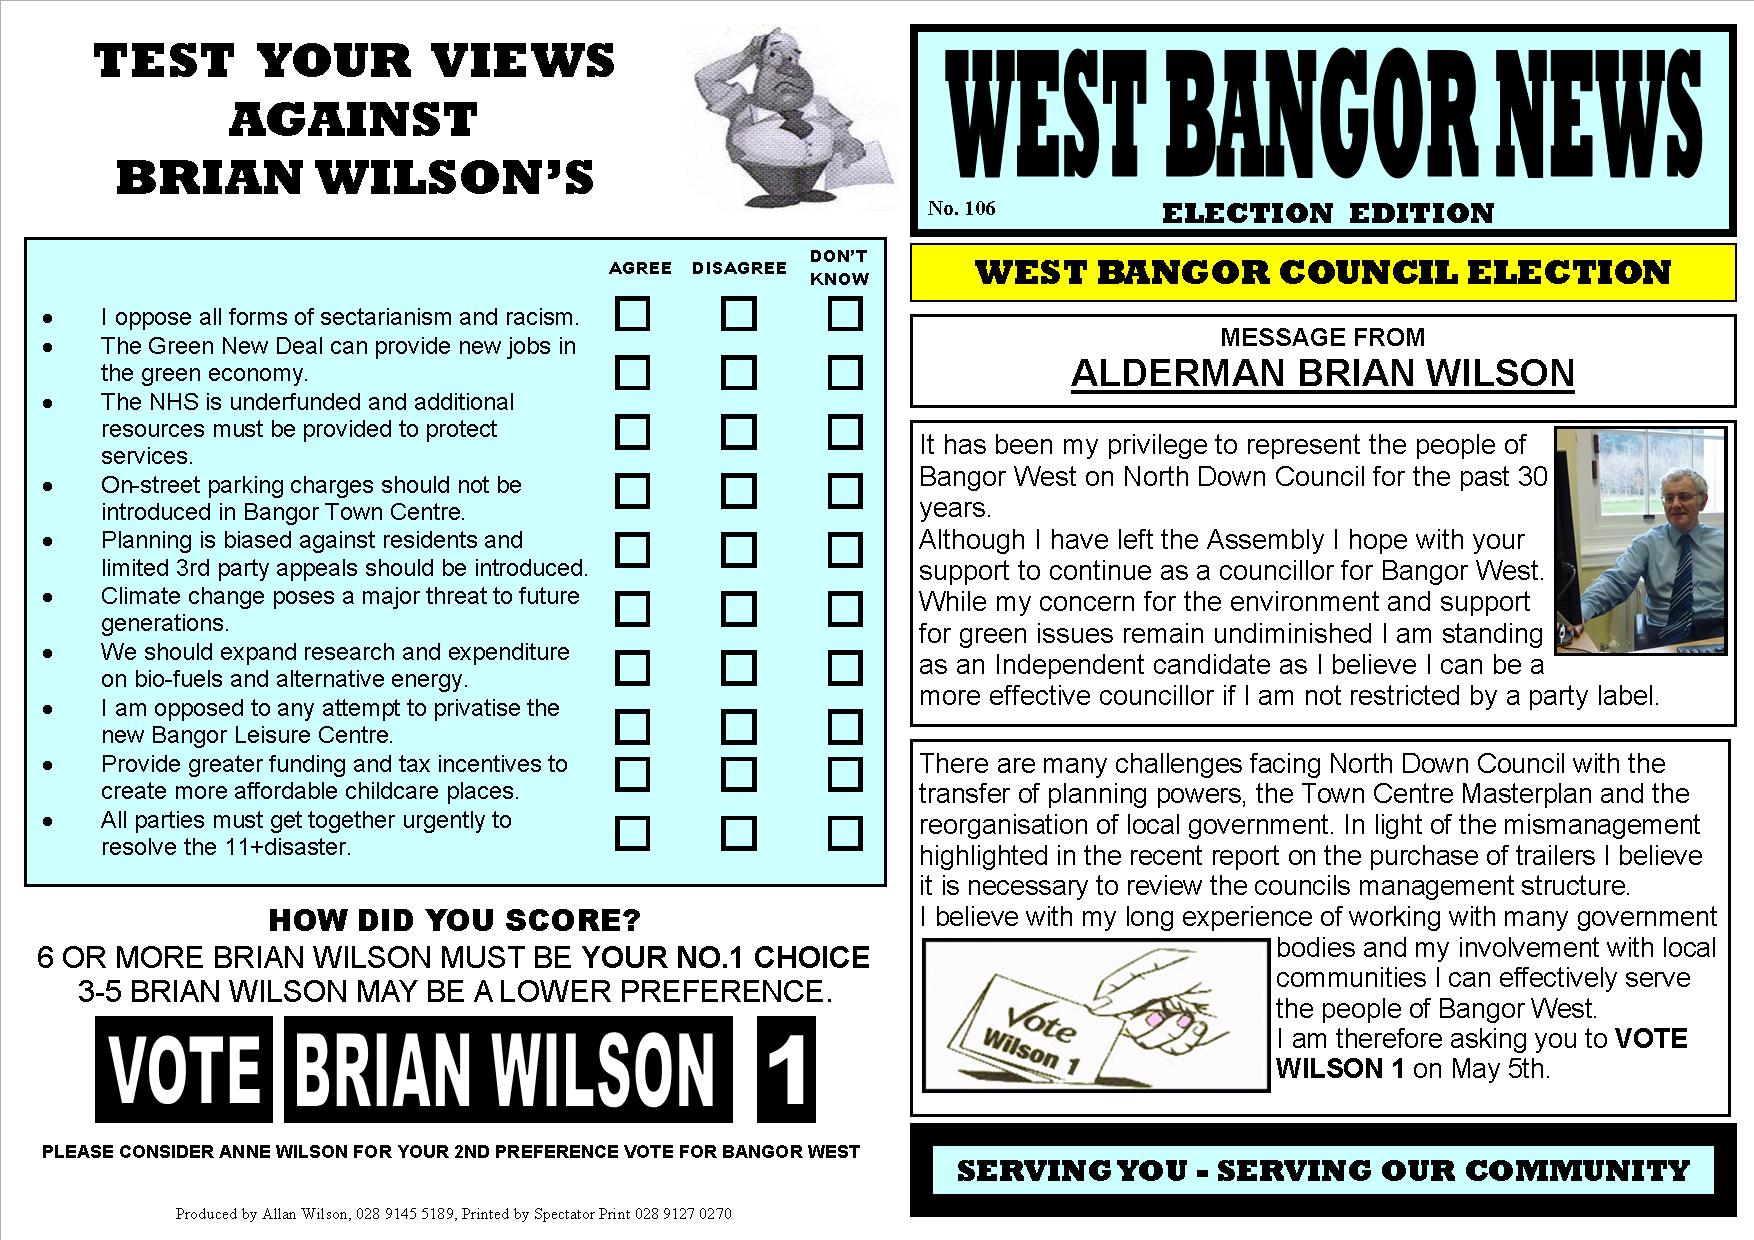 West Bangor News (106) Summer 2011 - Election Edition Brian Wilson North Down Councillor, first Green Party MLA in Northern Ireland